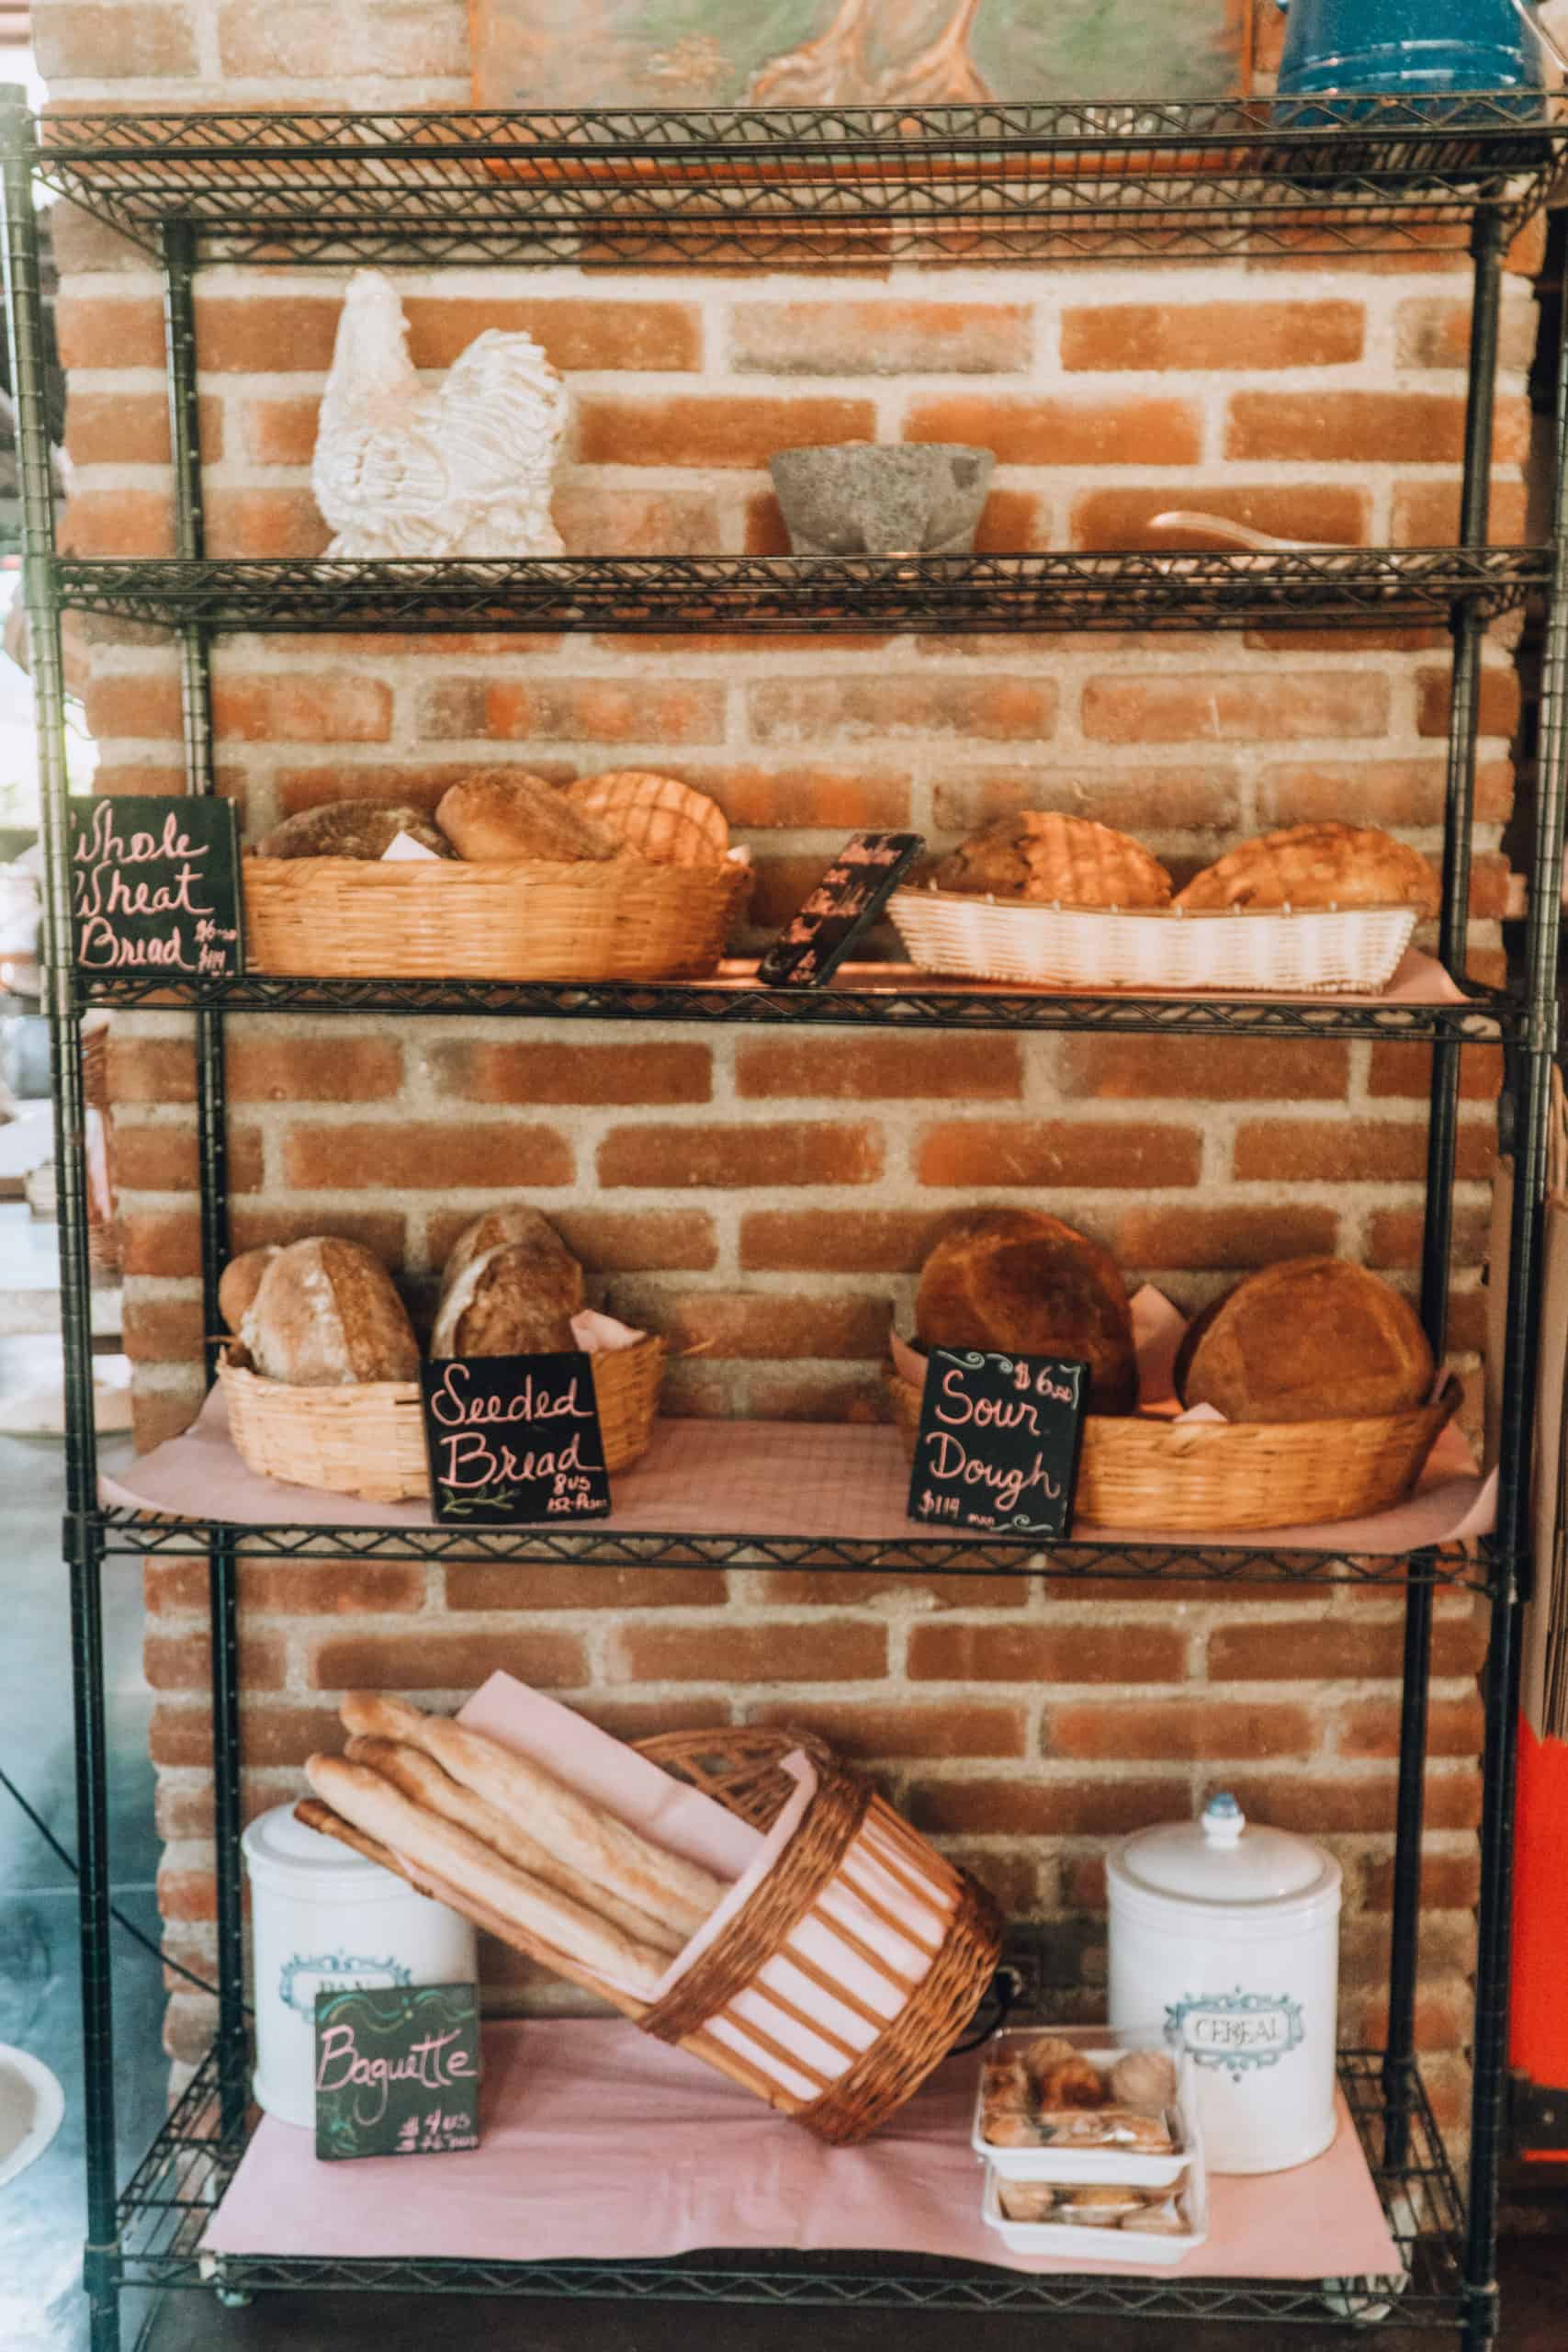 Bakery at Flora Farms in Cabo, Mexico